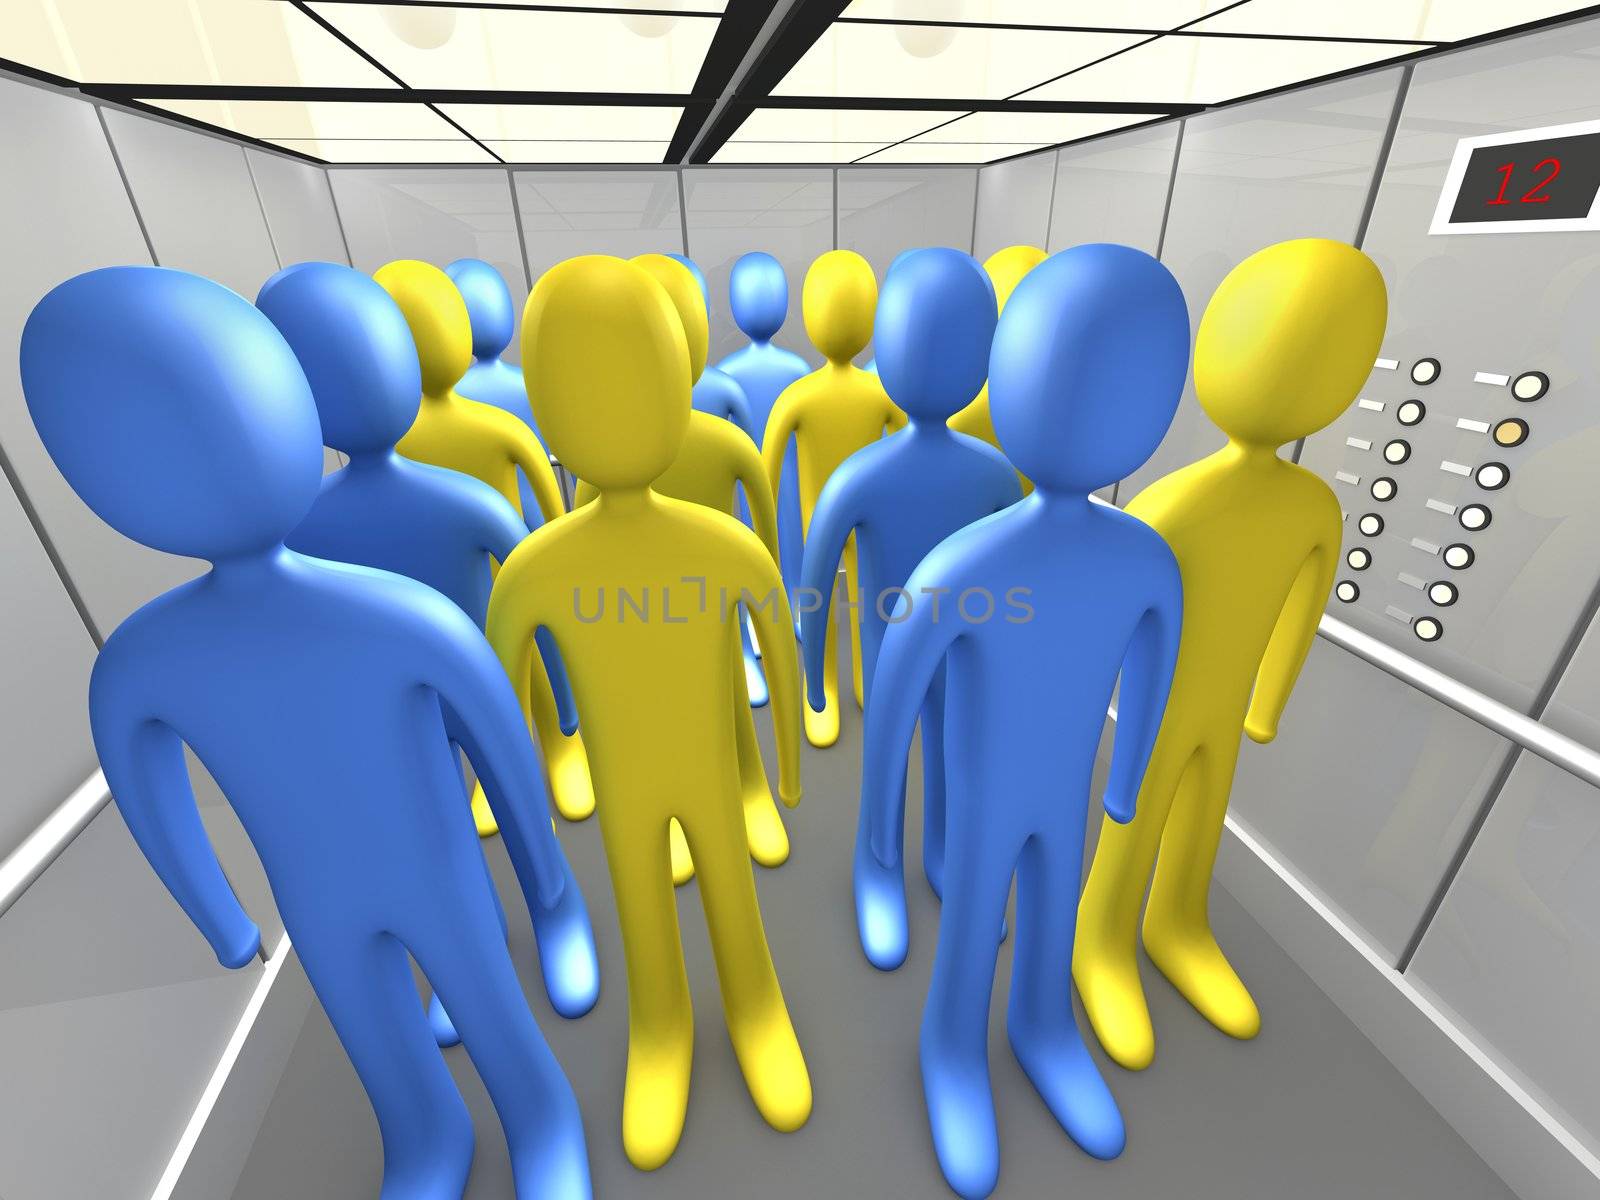 Computer generated image - People In Elevator.